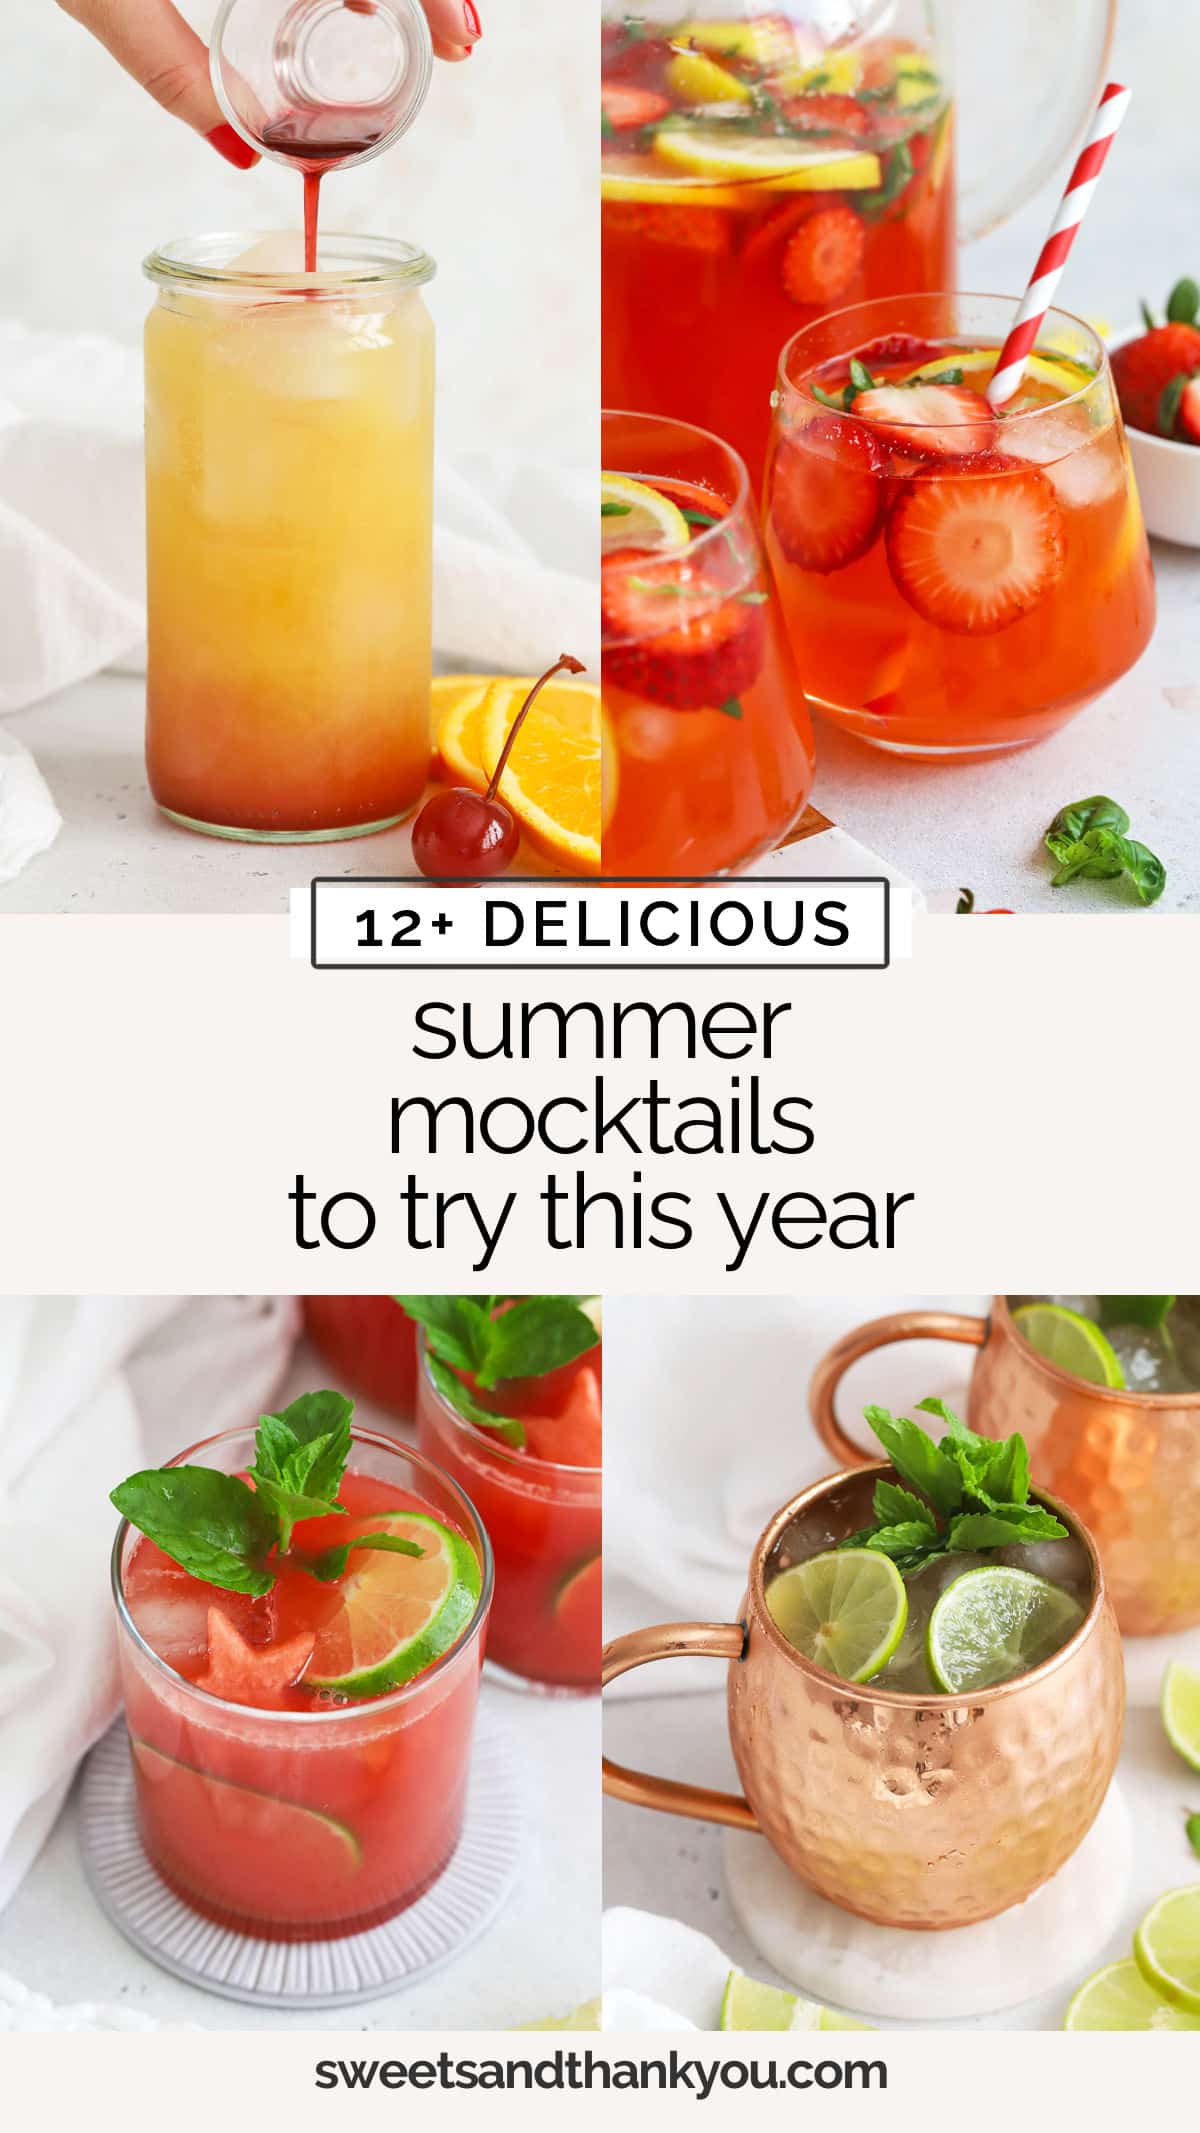 Cool of with these 10 summer mocktail recipes! These delicious non-alcoholic summer drinks will help you beat the heat in style. / summer drink recipes / summer mocktail recipes / family friendly summer drinks / summer drinks for pregnancy / the best summer mocktails / non-alcoholic summer cocktails